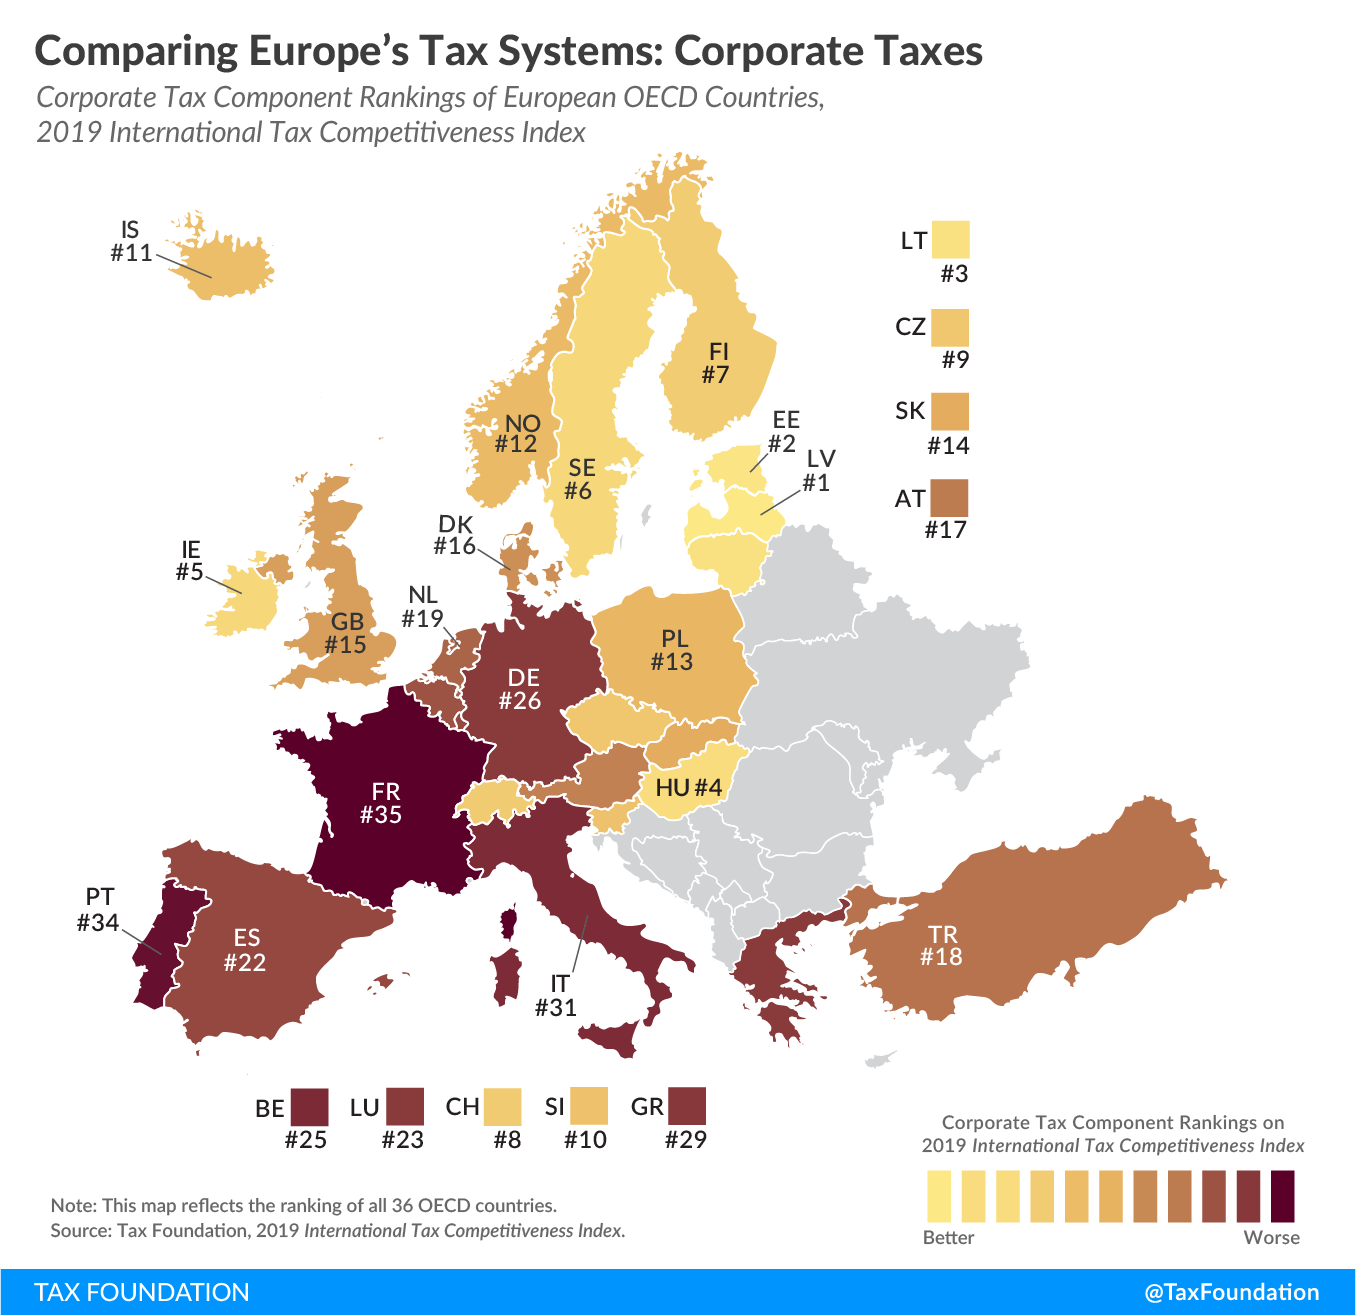 Worst corporate tax systems in the OECD, best corporate tax systems in Europe, best corporate tax systems in the OECD, Worst corporate tax systems in Europe, Best corporate tax systems in Europe, worst corporate tax codes around the world